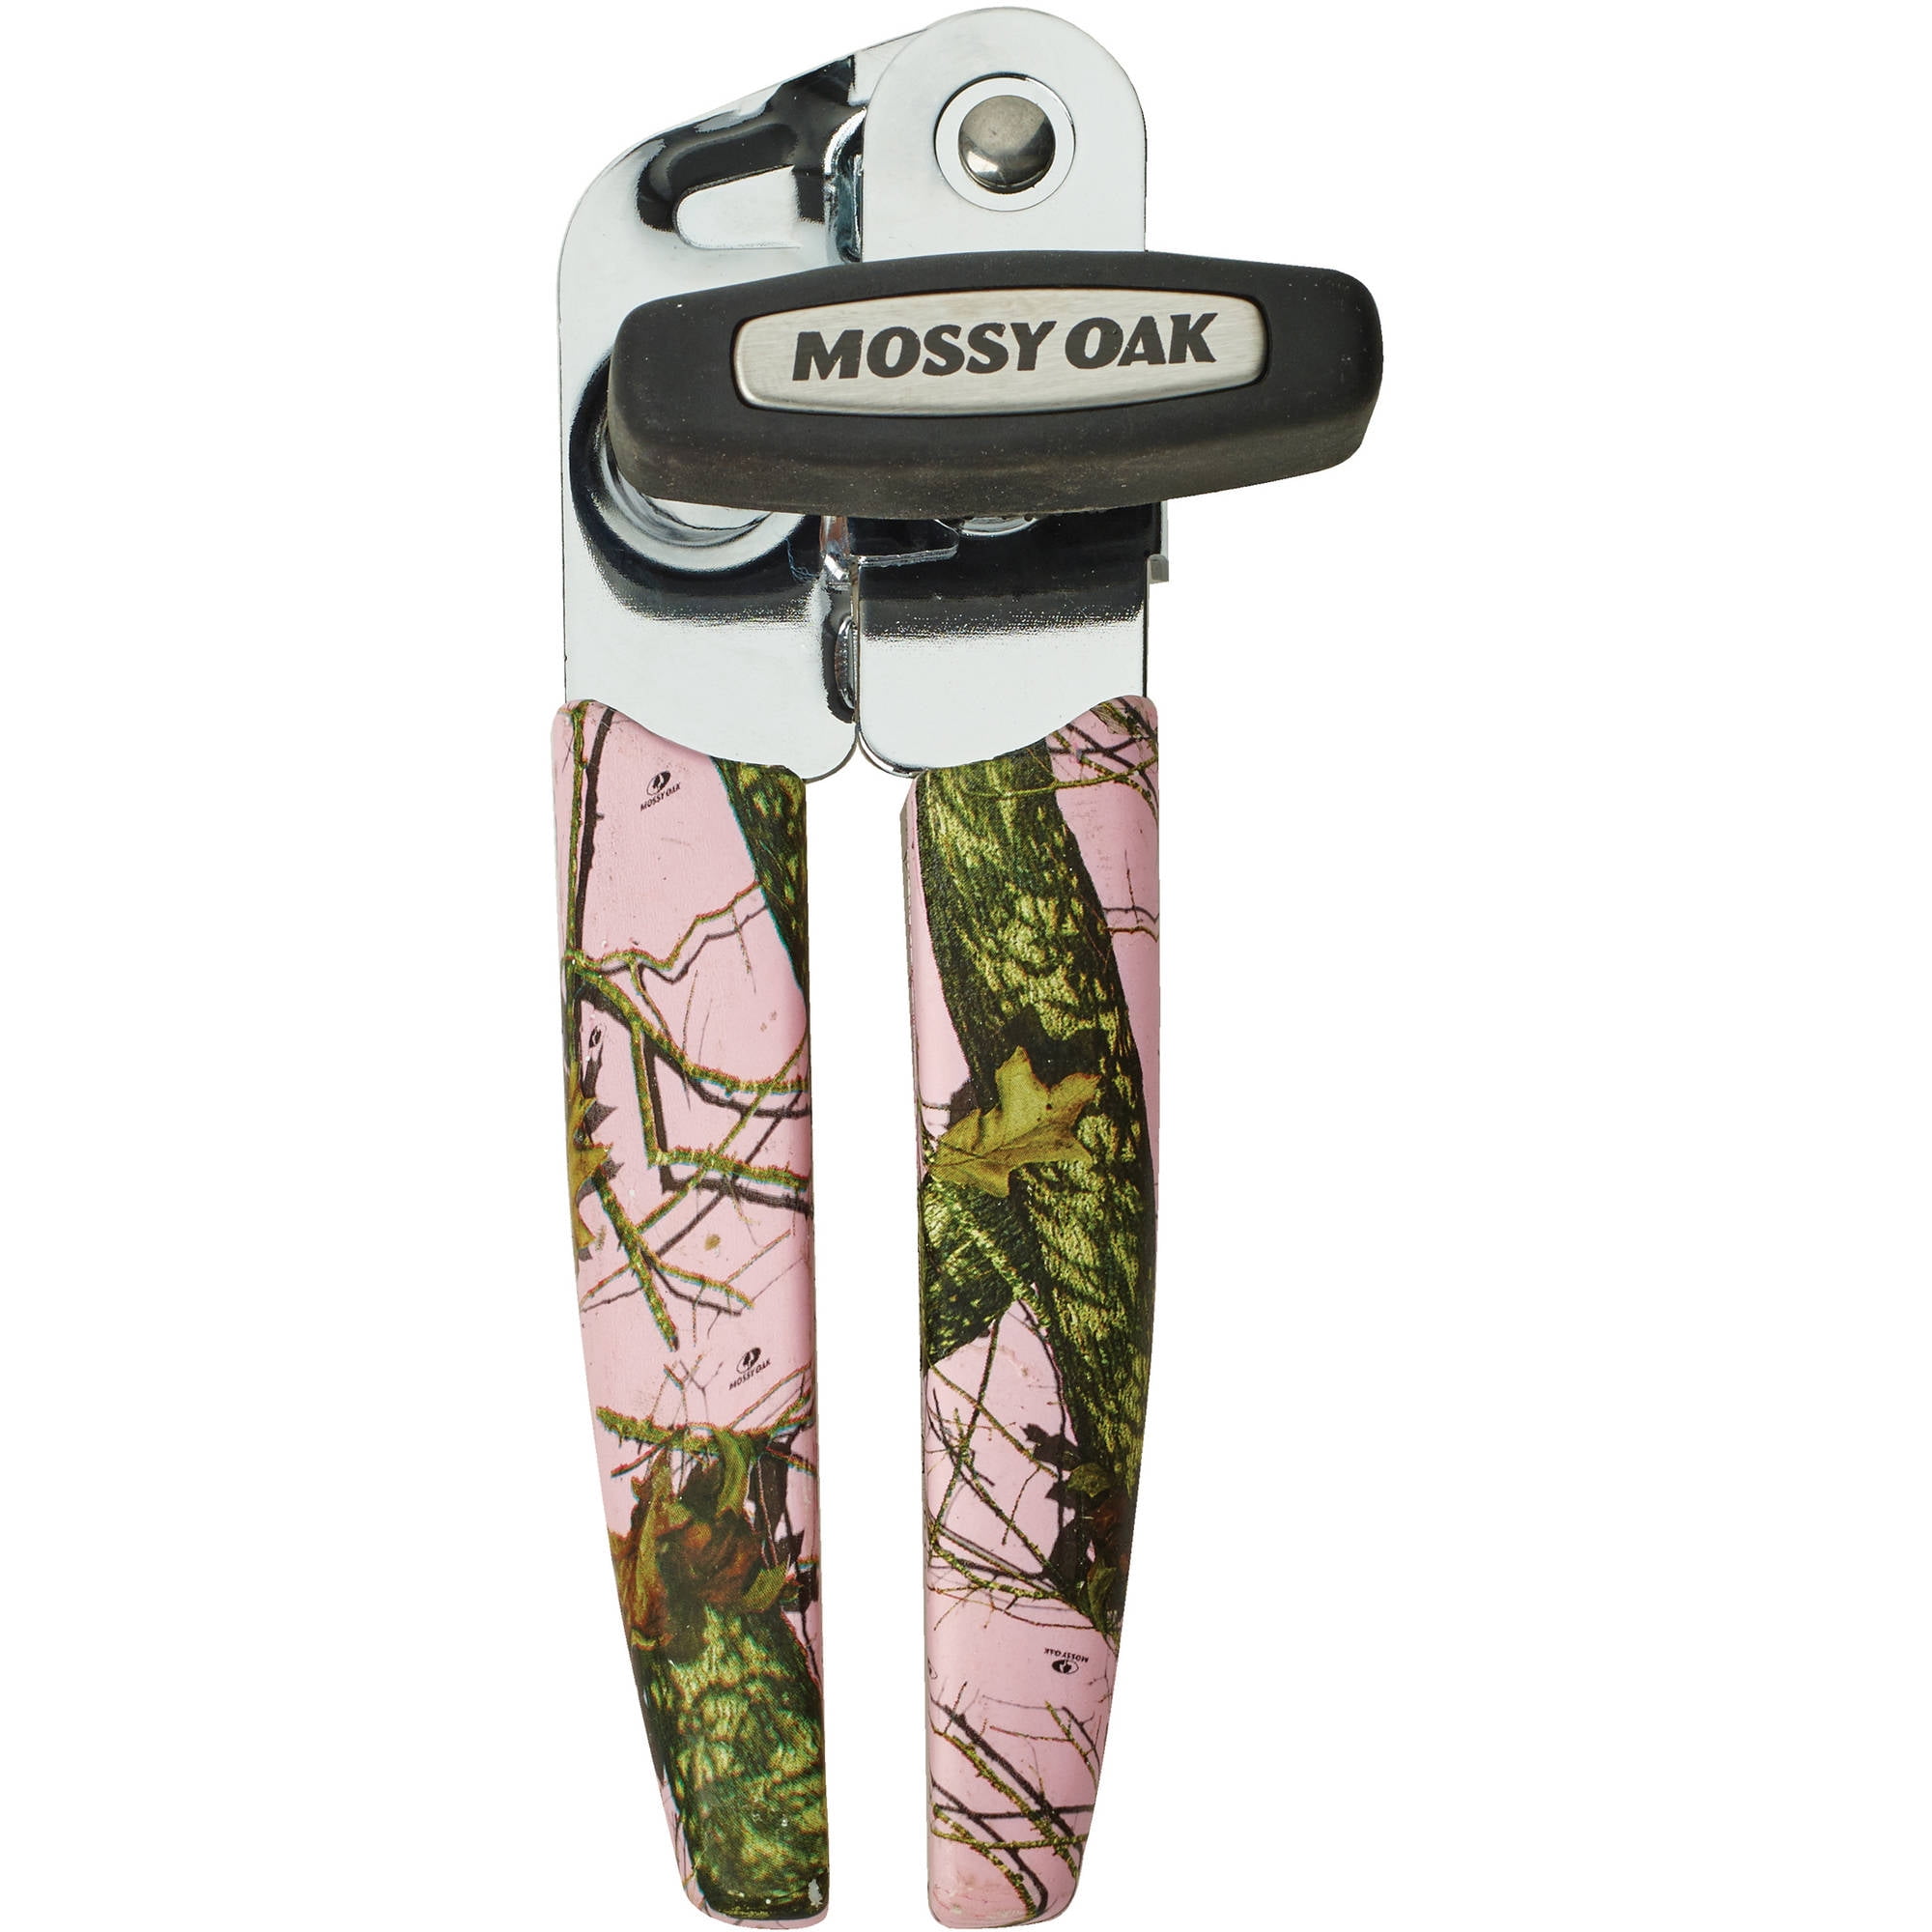 Mossy Oak Pink Camouflage Handled Can Opener with Chrome Head 